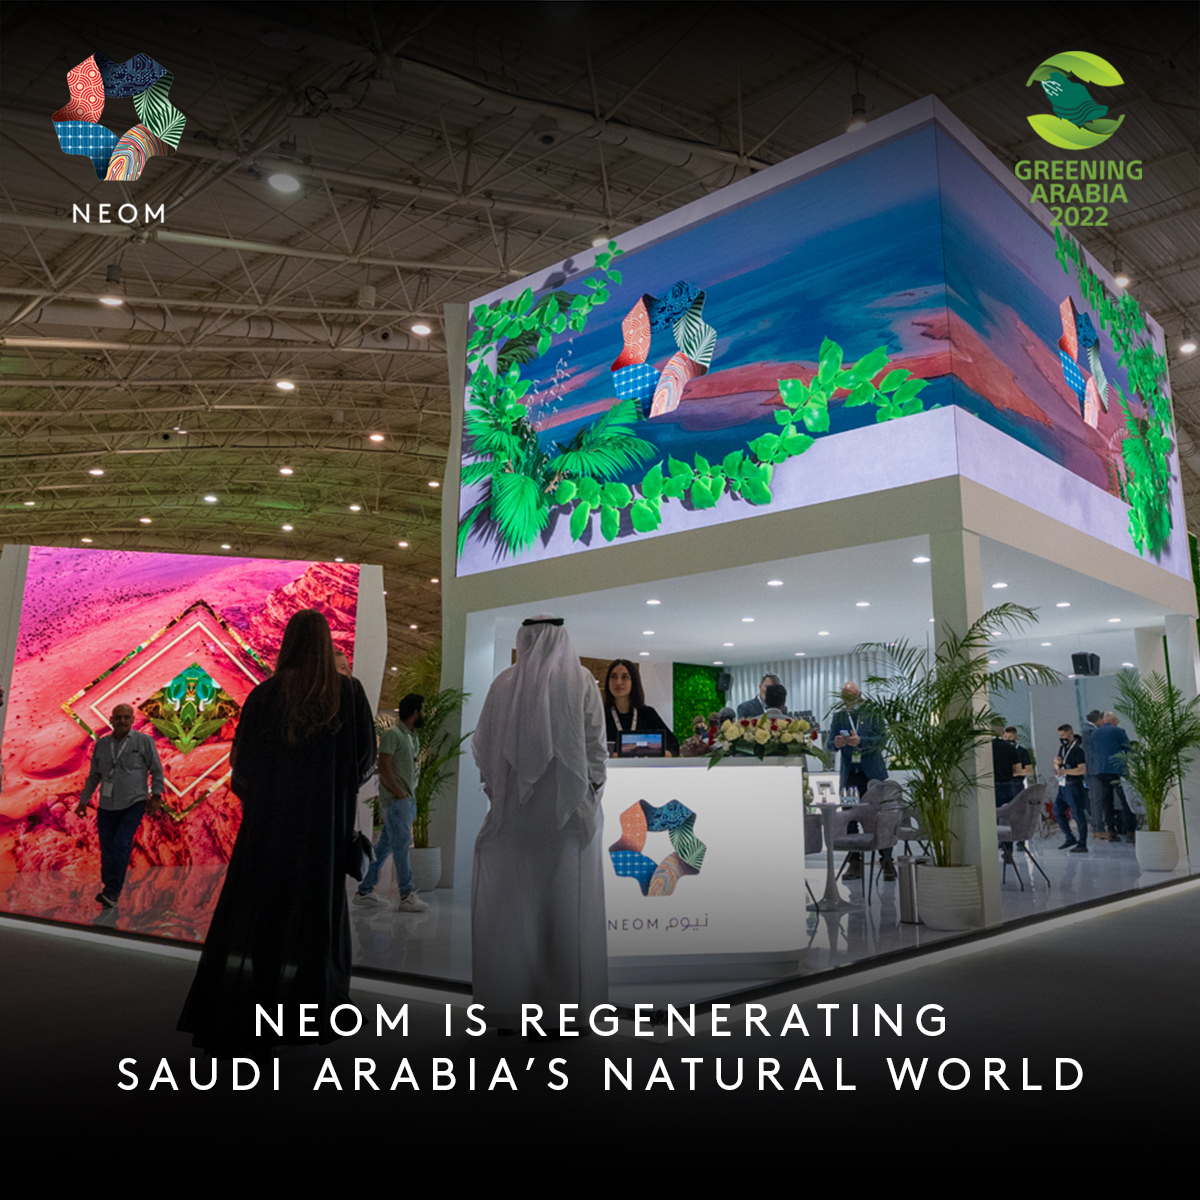 We will share our plans for a greener future at @GreeningArabia from May 29-31. Swing by the NEOM stand (S1) in Hall 1 – from May 29-31 – to find out more  👋

#NEOM #MadeToChange